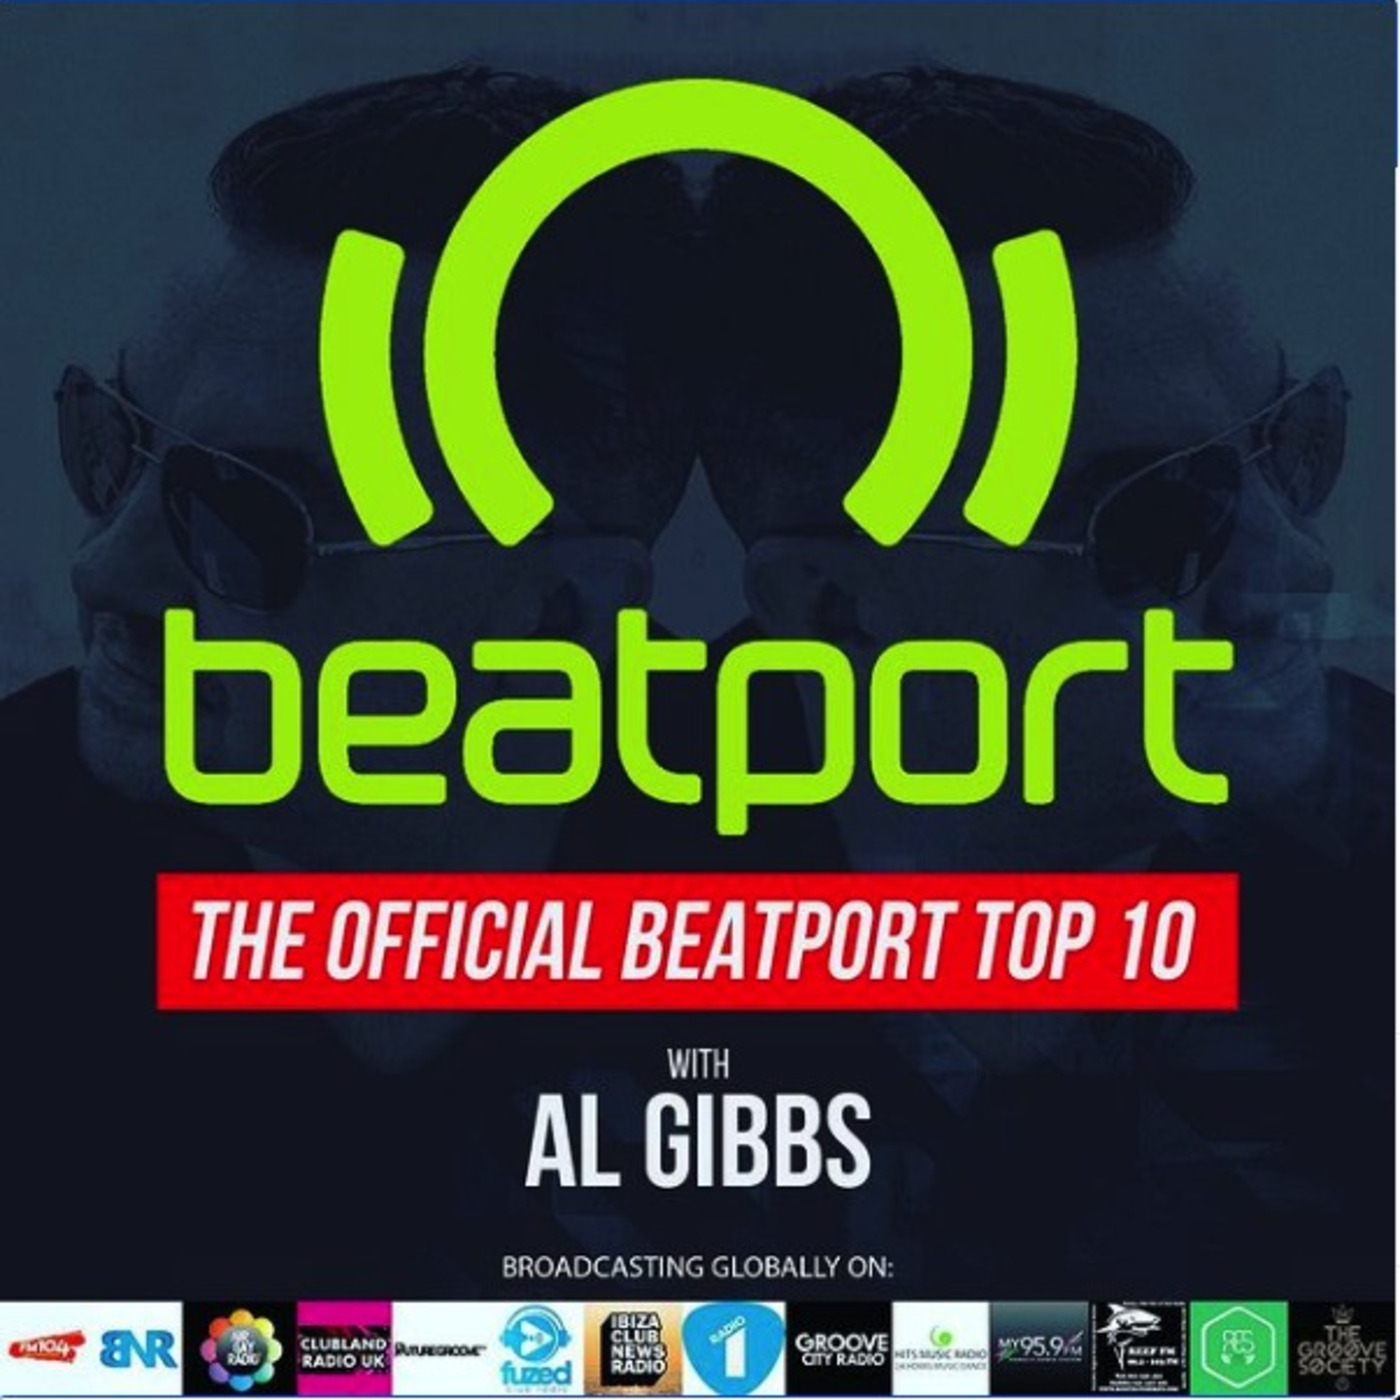 Episode 60: THE OFFICIAL BEATPORT TOP 10 WITH AL GIBBS (week 8 2021)